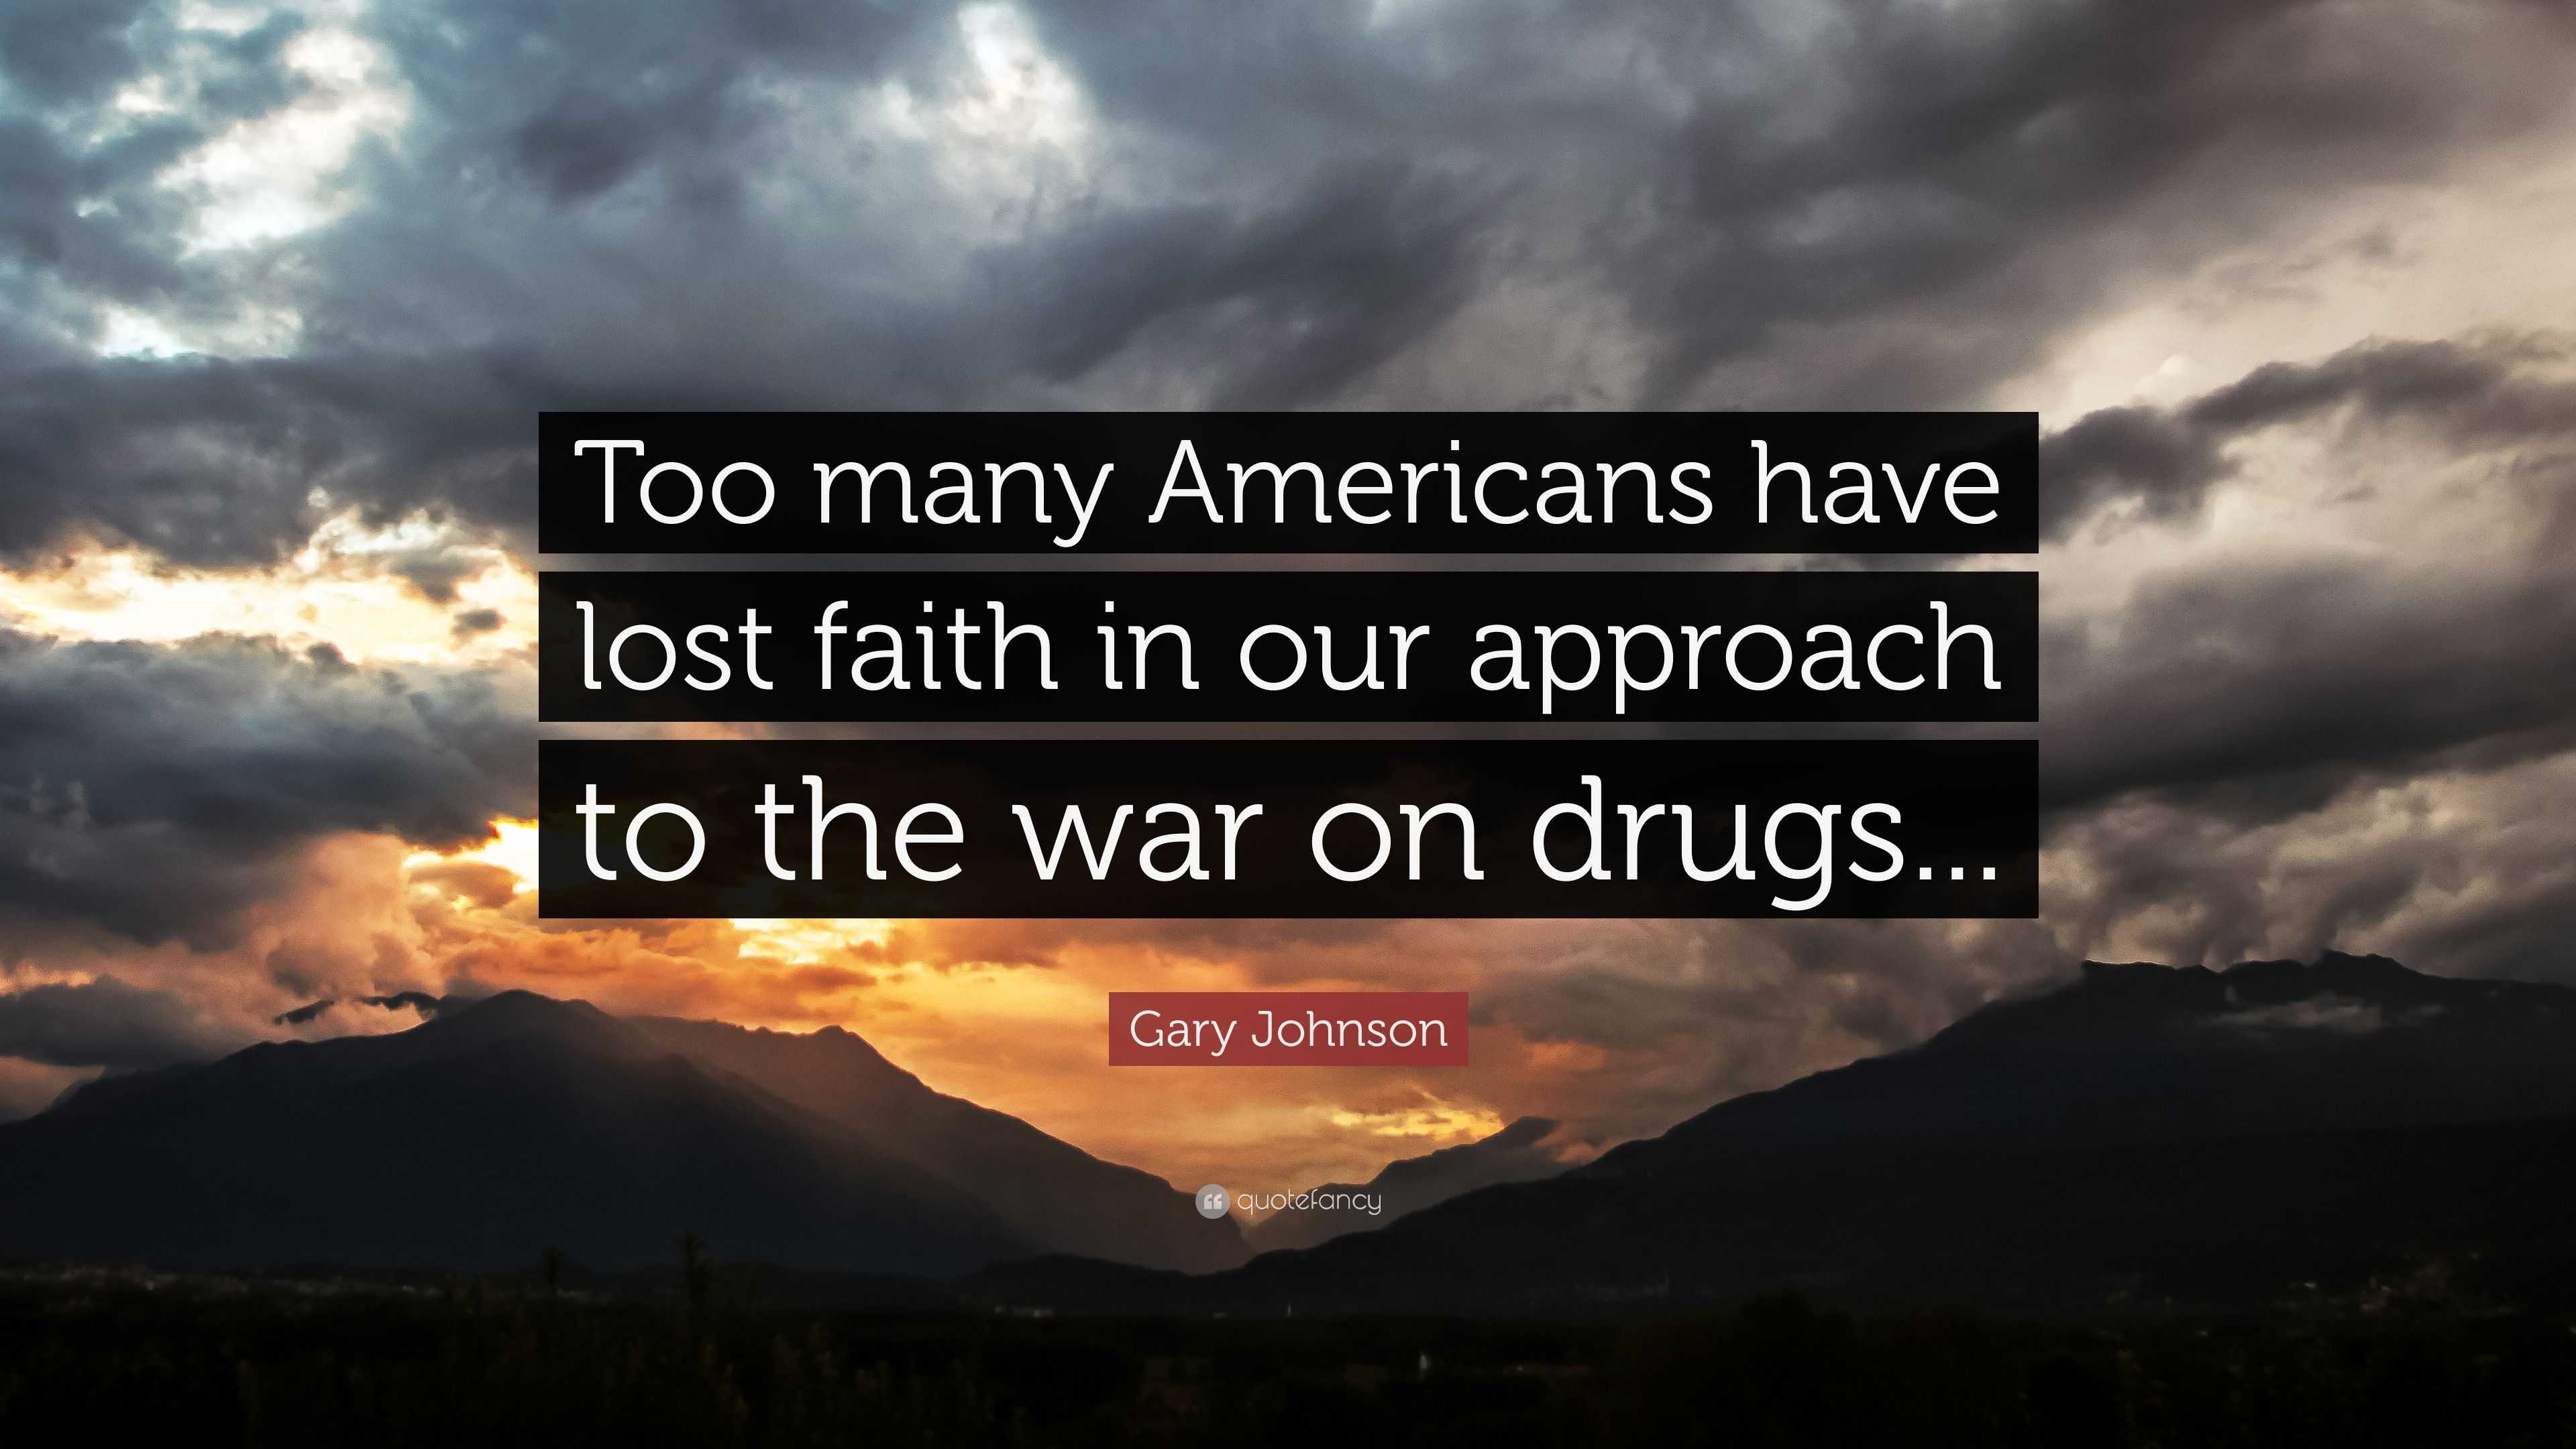 Gary Johnson Quote: “Too many Americans have lost faith in our approach